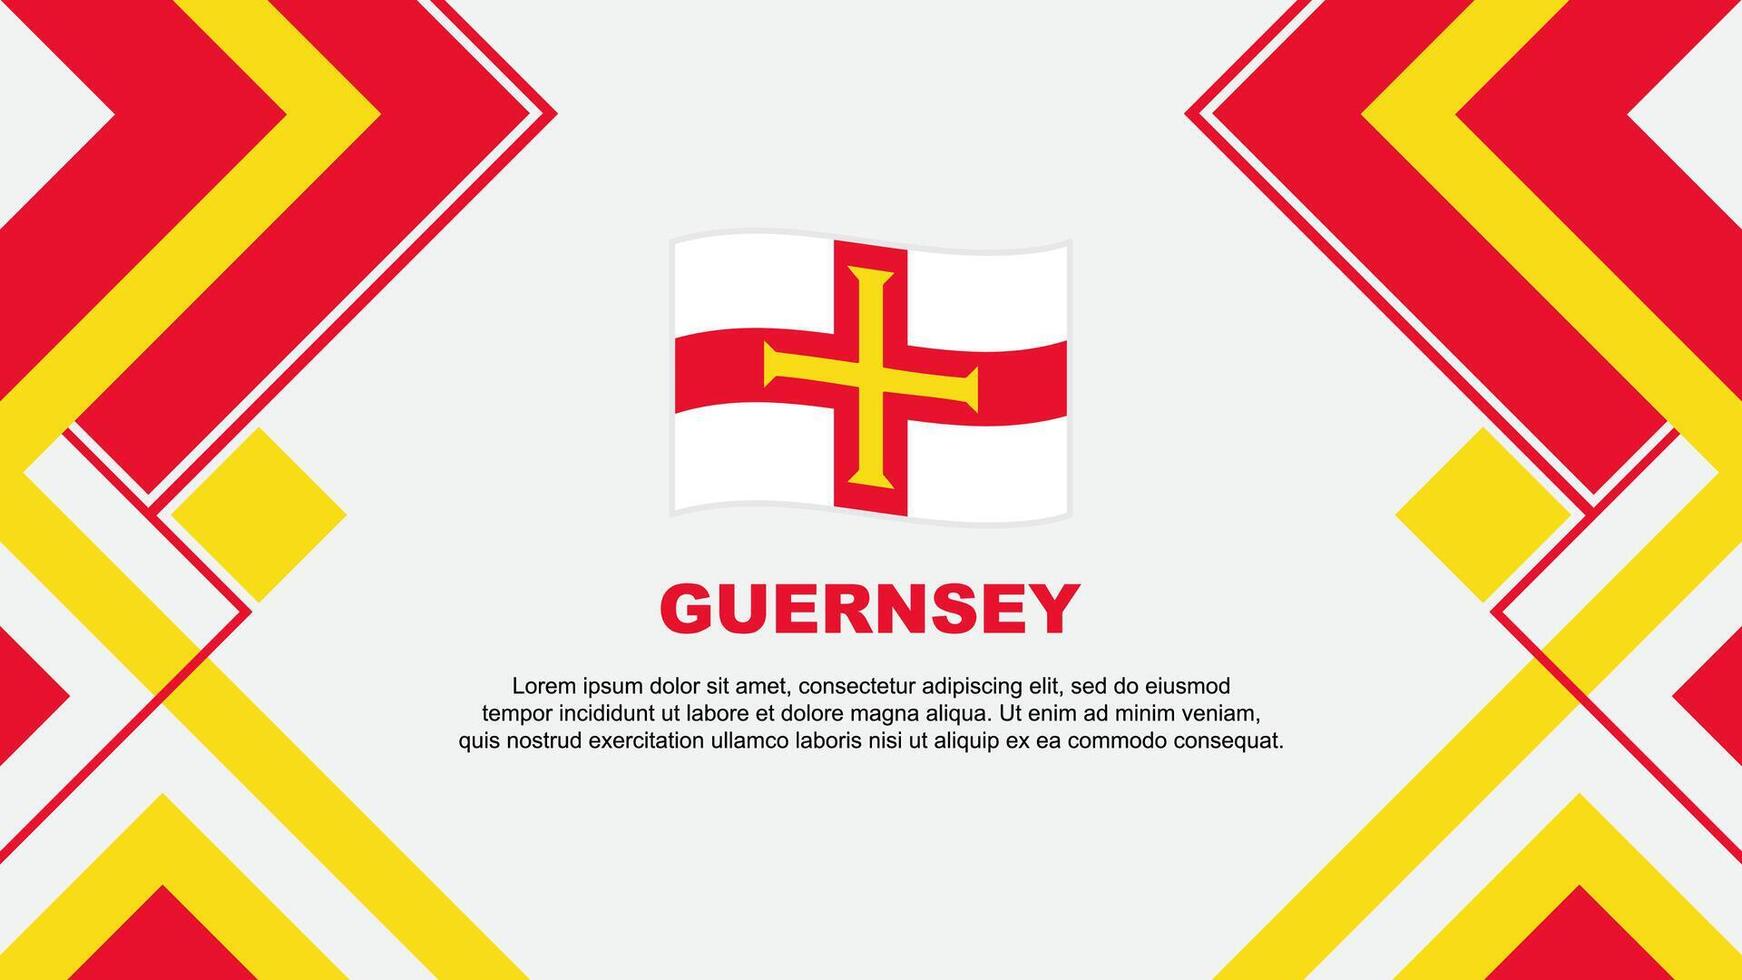 Guernsey Flag Abstract Background Design Template. Guernsey Independence Day Banner Wallpaper Vector Illustration. Guernsey Banner